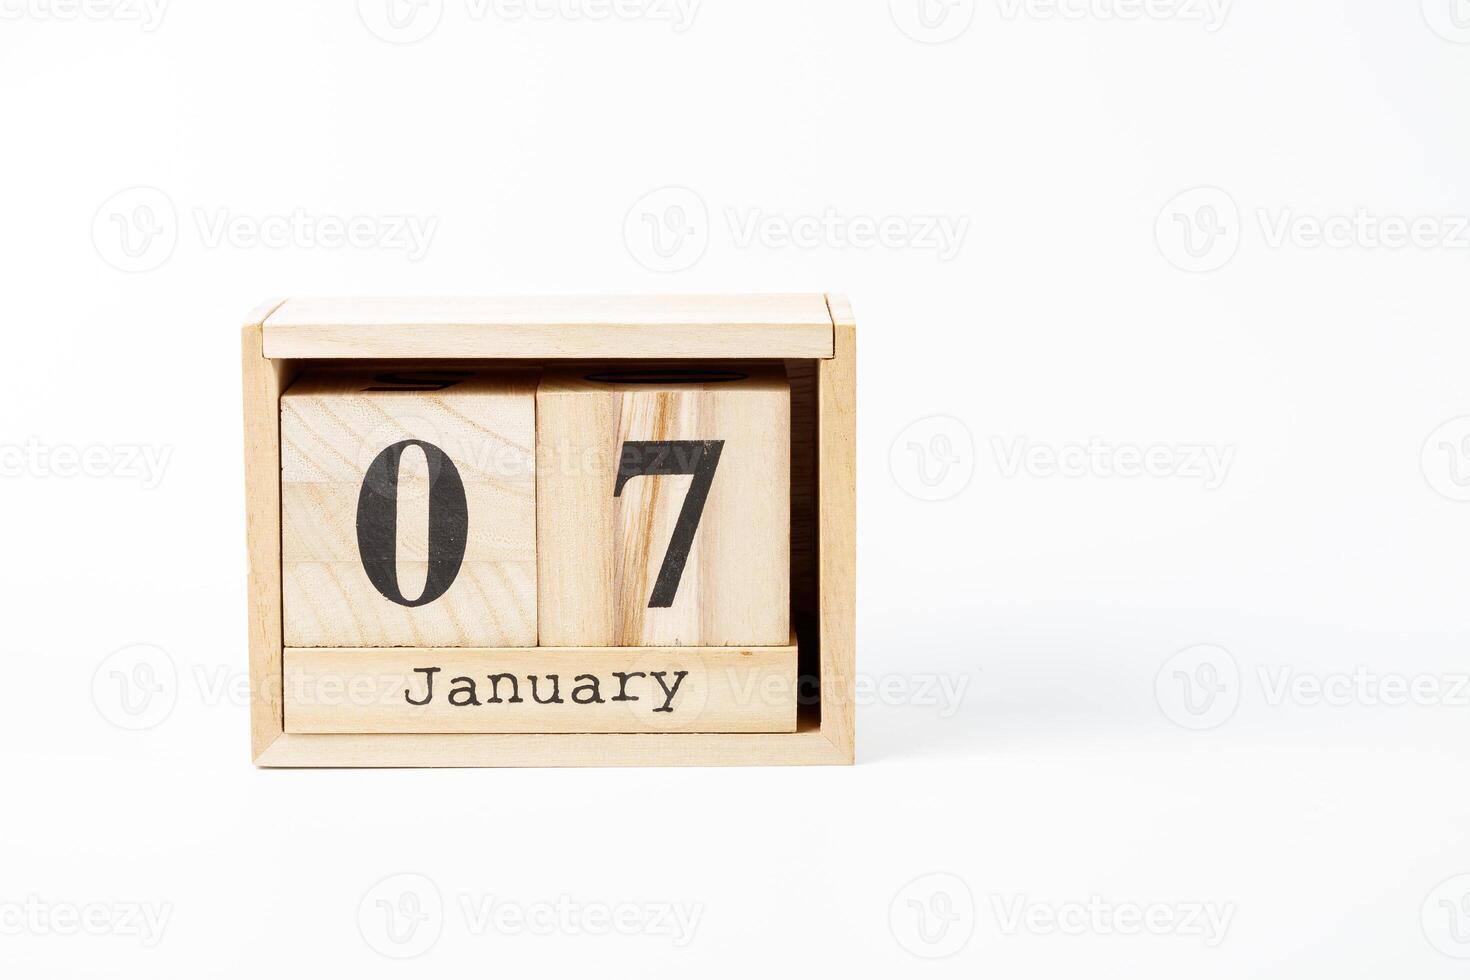 Wooden calendar January 07 on a white background photo